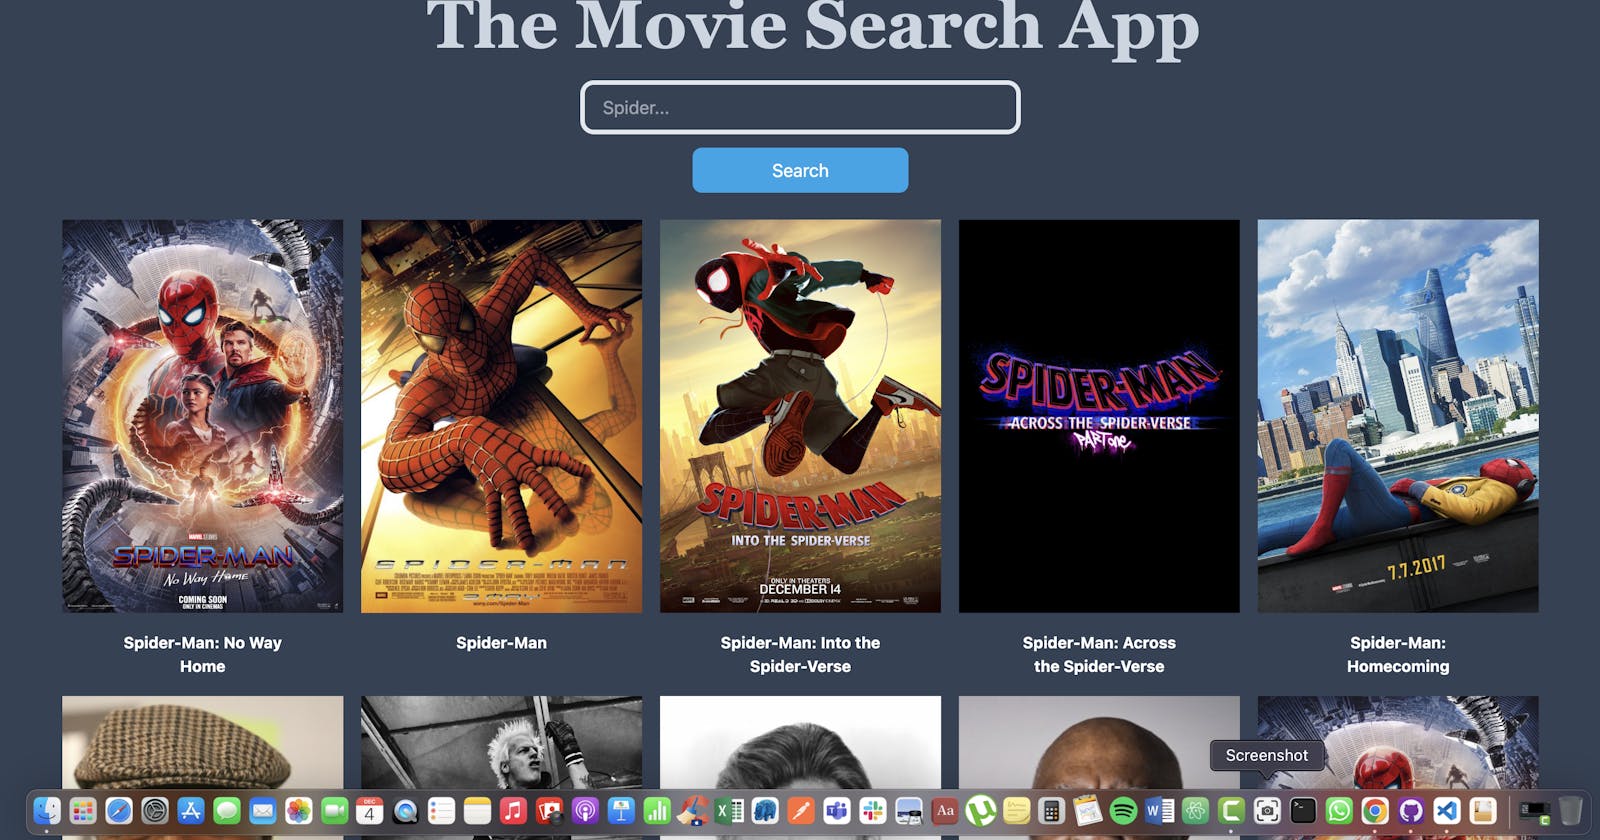 React Project: The Movie Search App